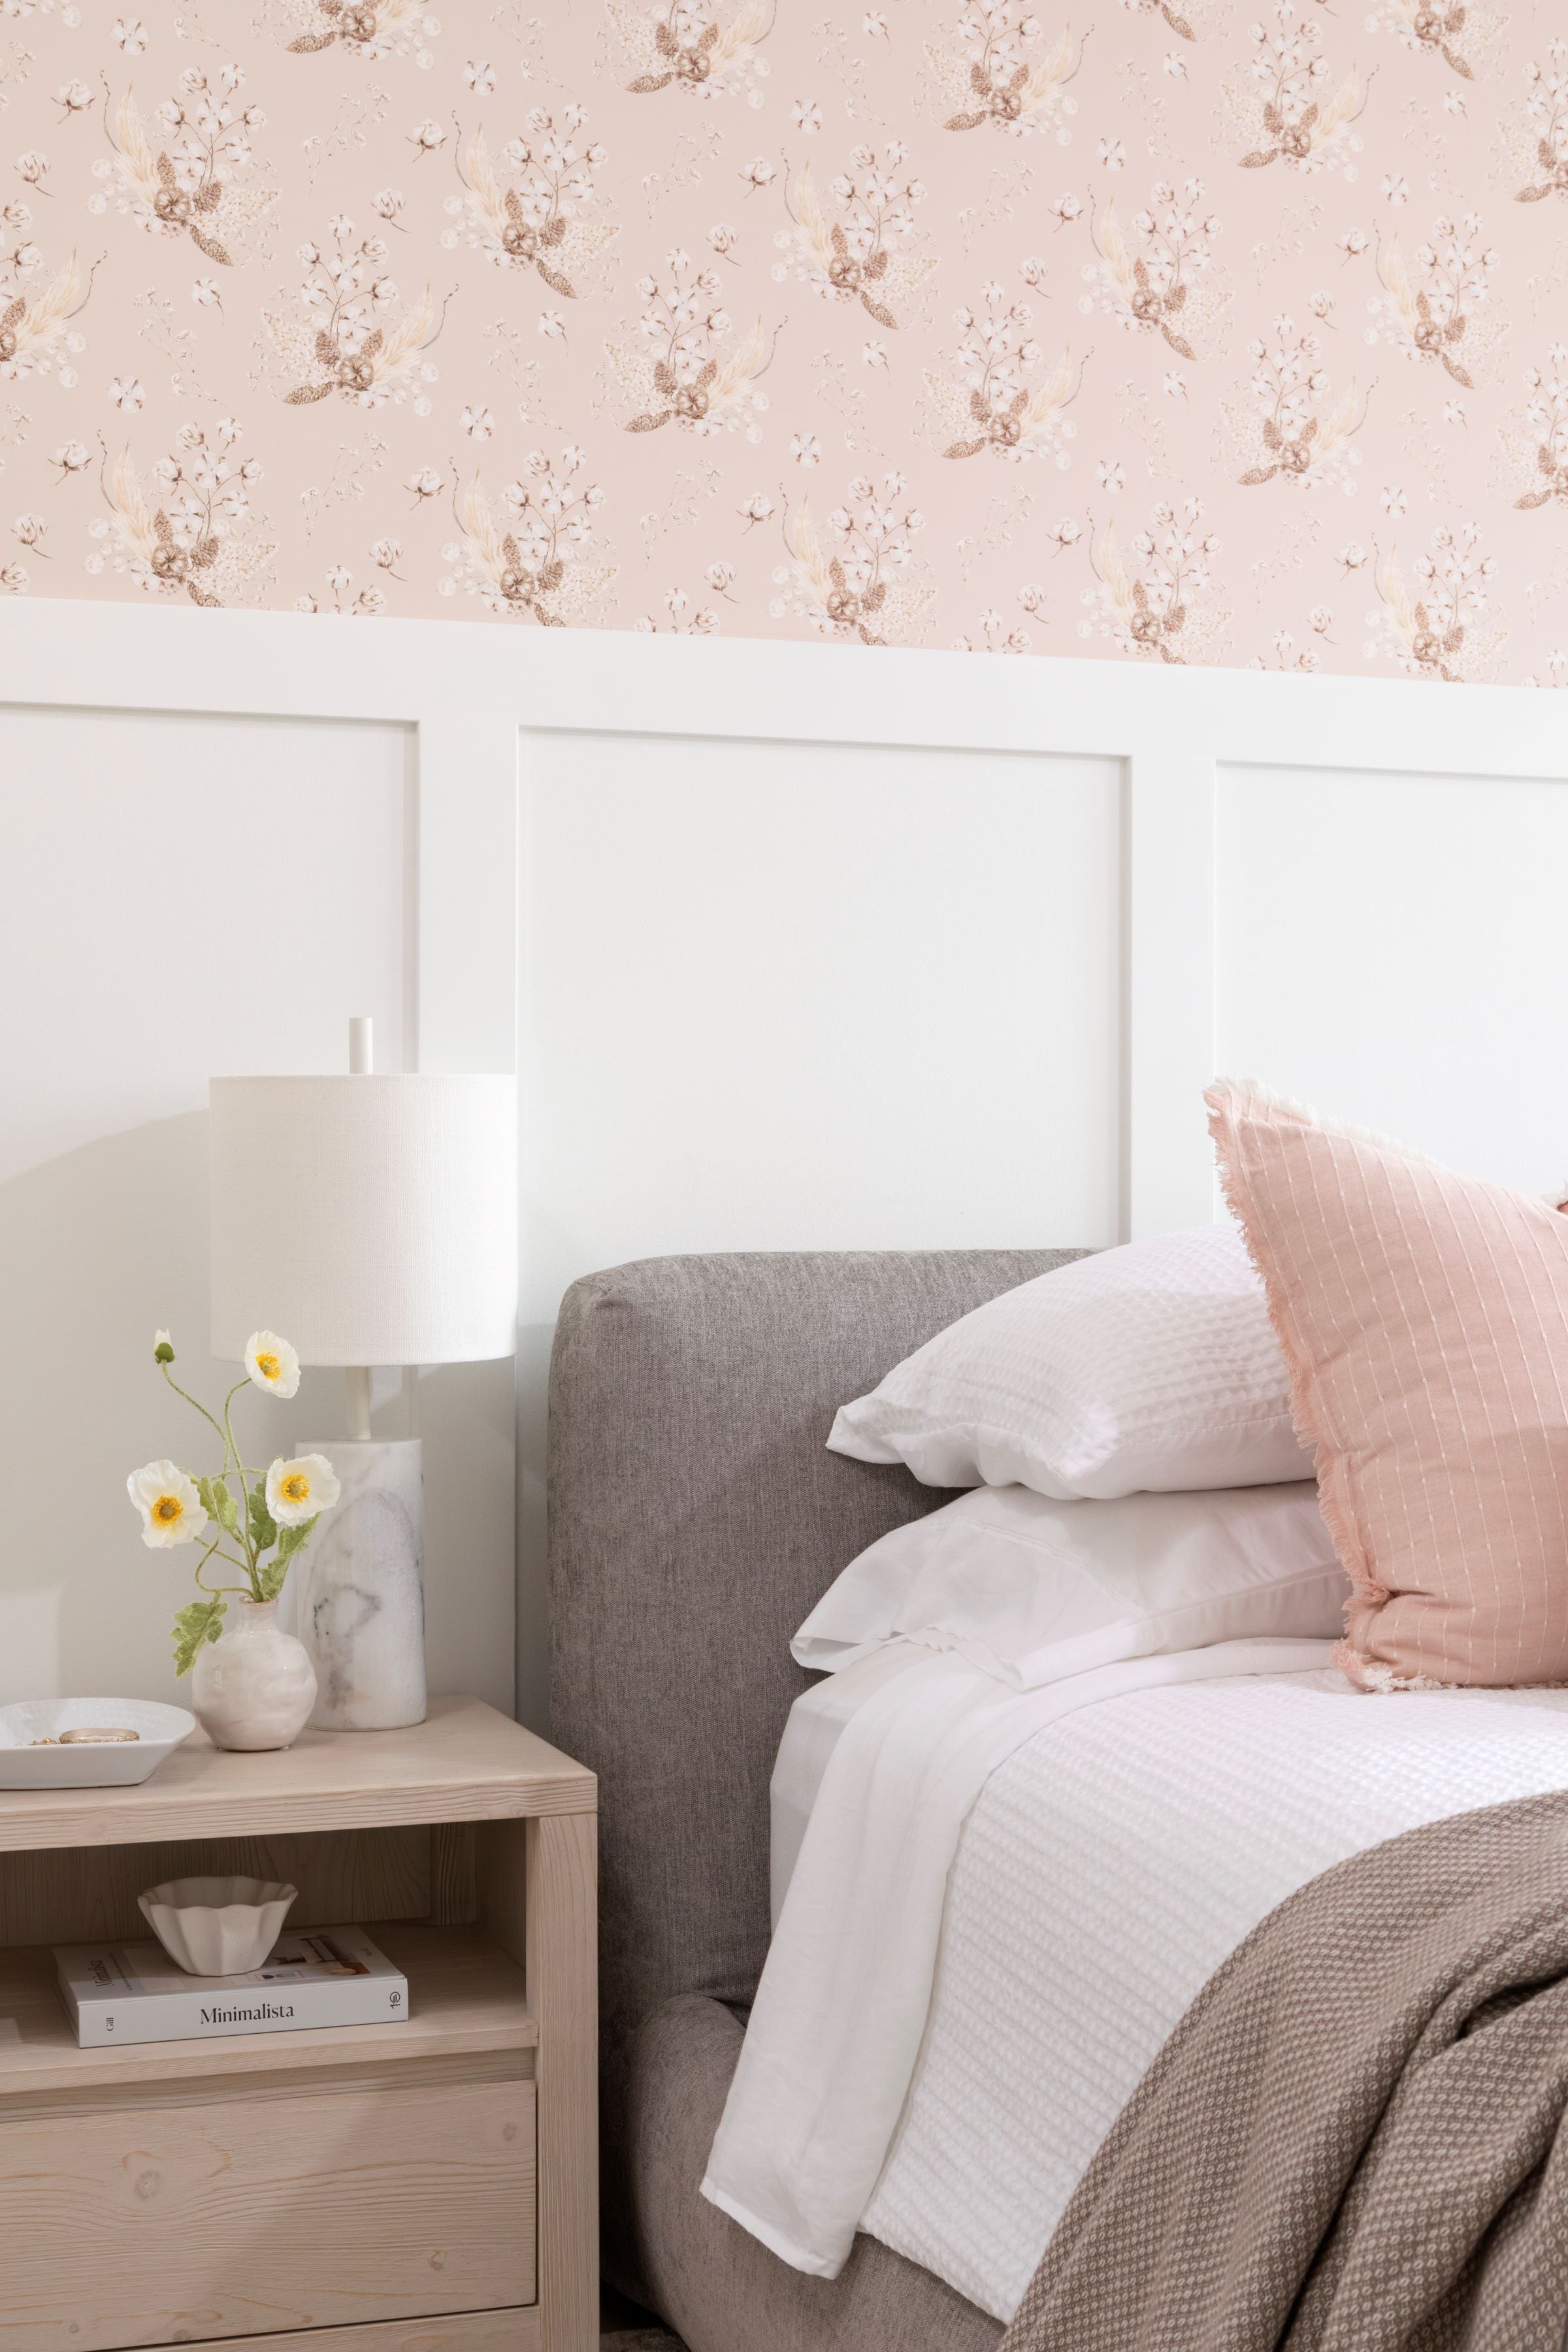 A cozy bedroom corner with 'Boho Bouquet II Wallpaper' above the wainscoting, creating a warm, bohemian vibe. The wallpaper's blush and gold floral motifs harmonize with the room’s soft textiles and wooden bedside table, crafting an inviting, stylish space.